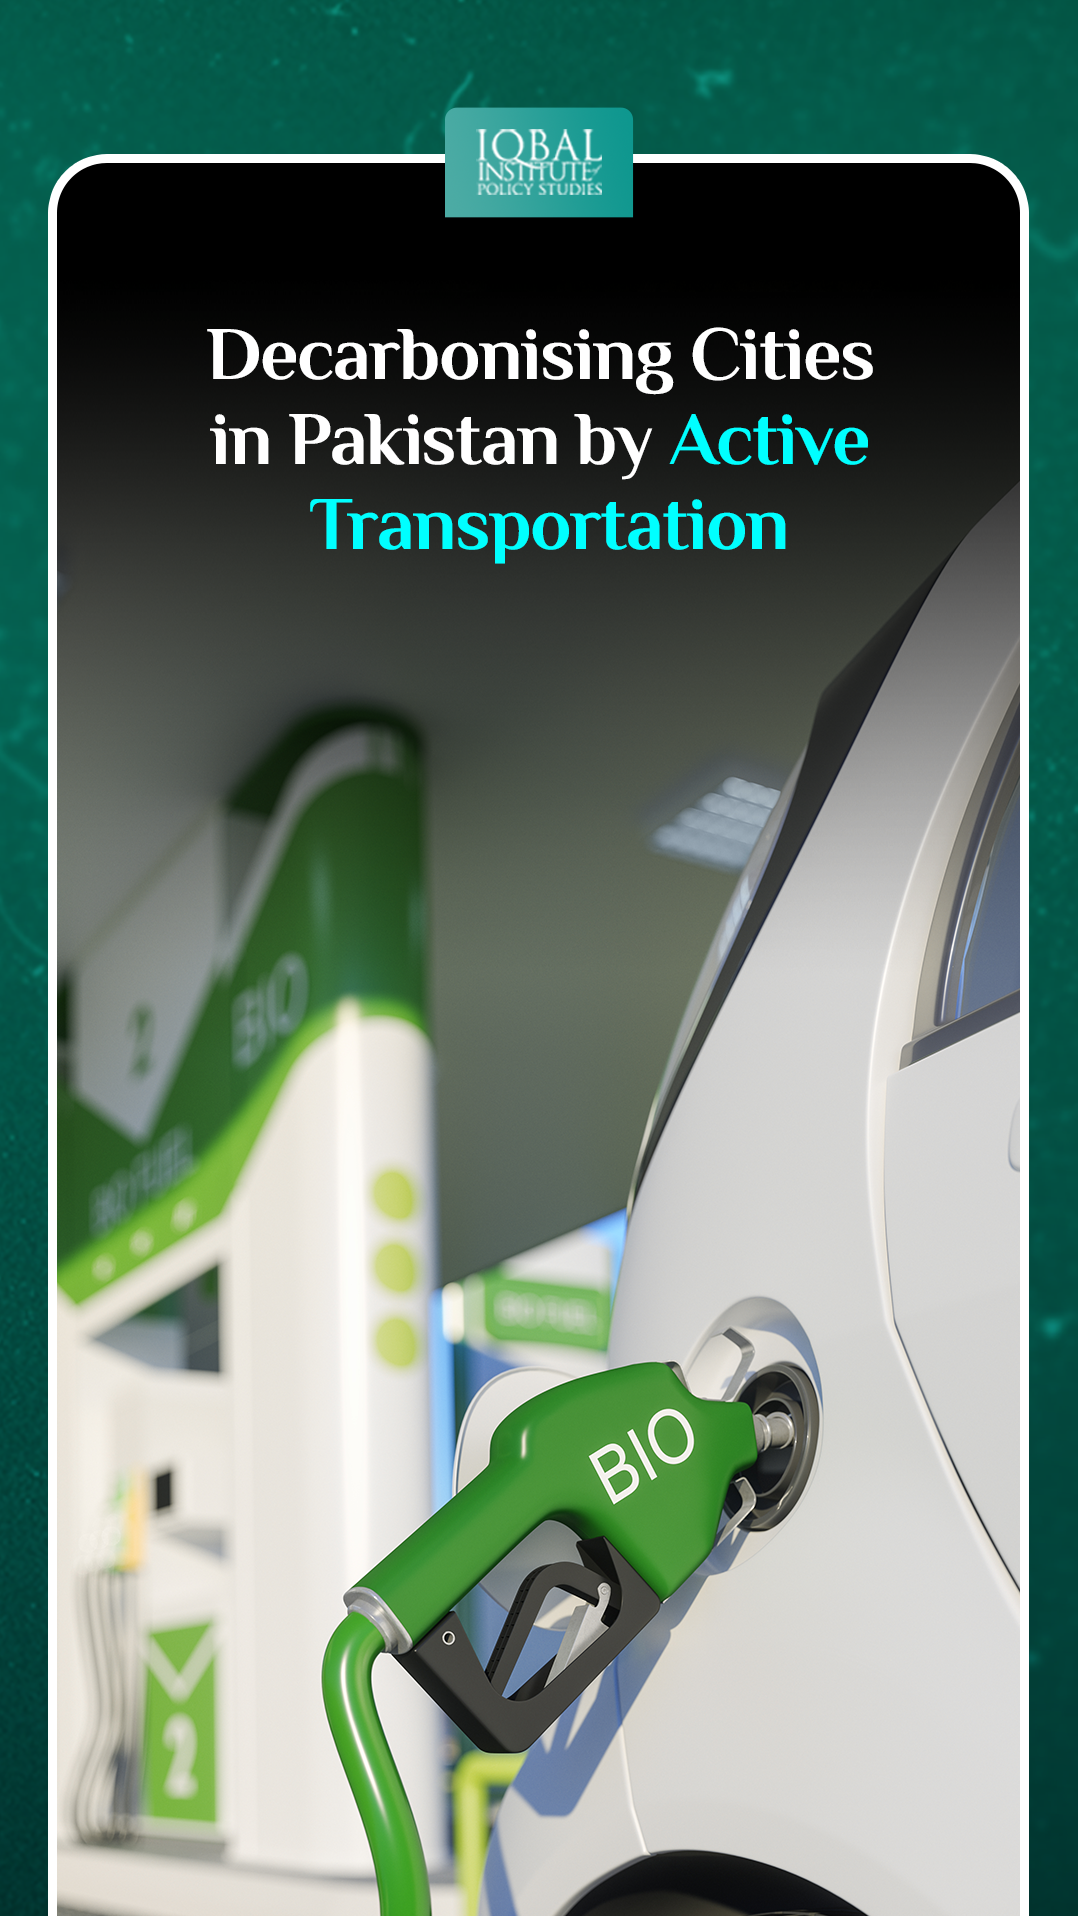 Decarbonising Cities in Pakistan by Active Transportation